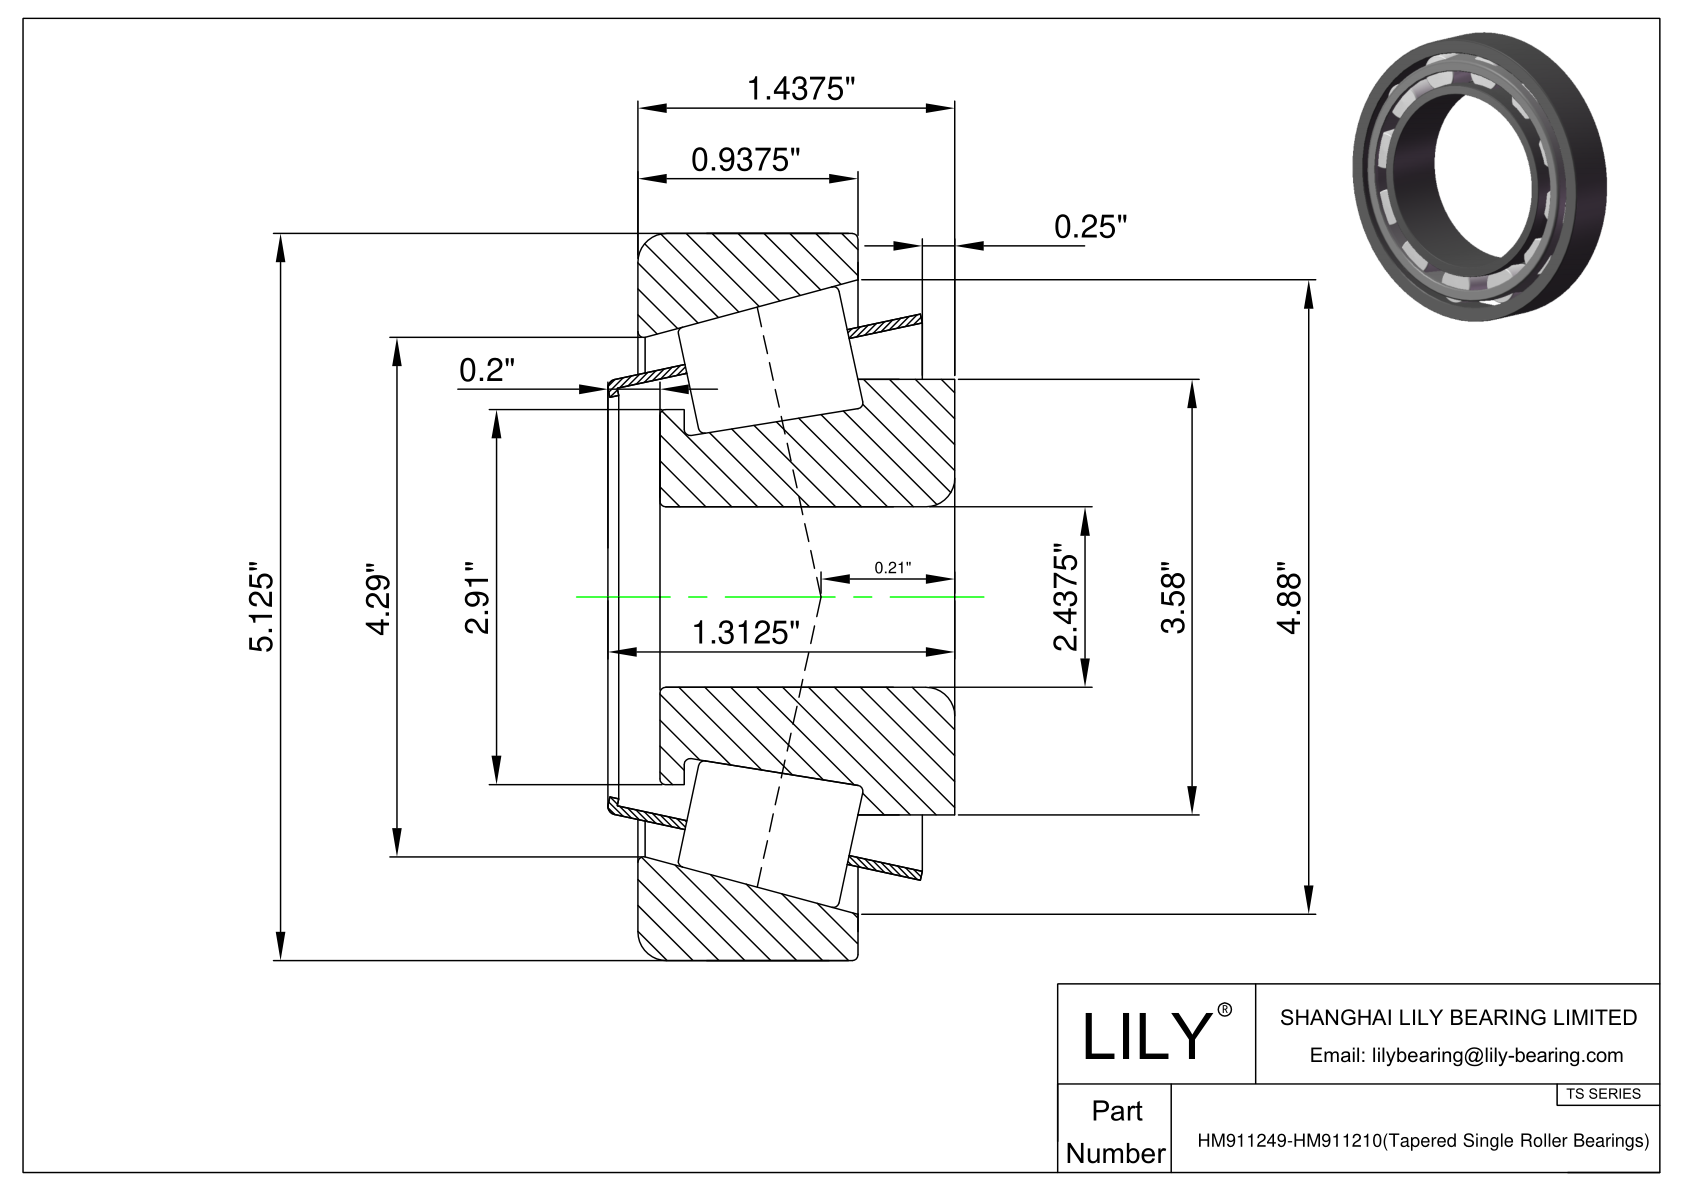 HM911249-HM911210 TS (Tapered Single Roller Bearings) (Imperial) cad drawing